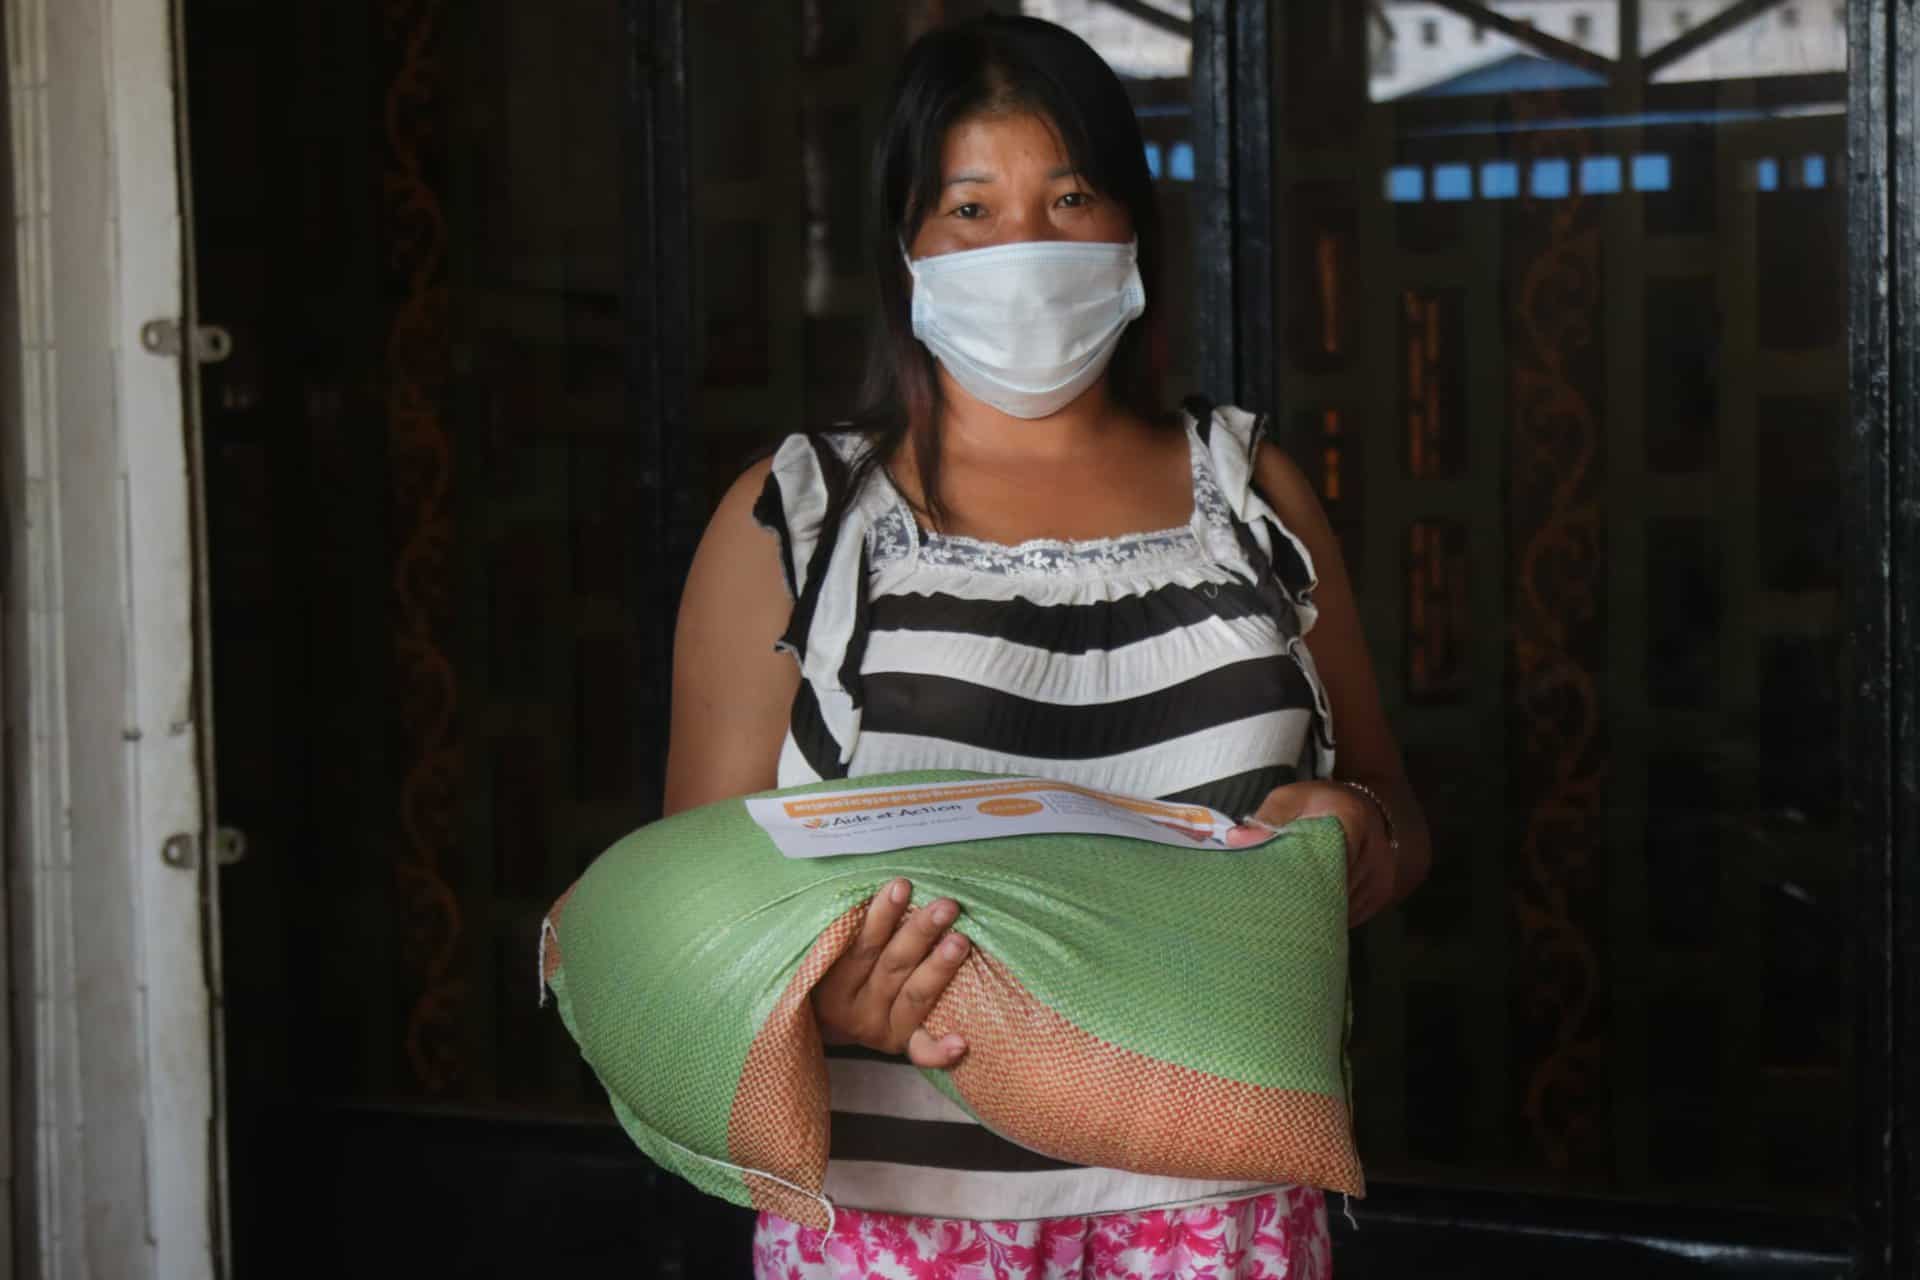 Aide et Action provides food distribution in Cambodia during the Coronavirus crisis